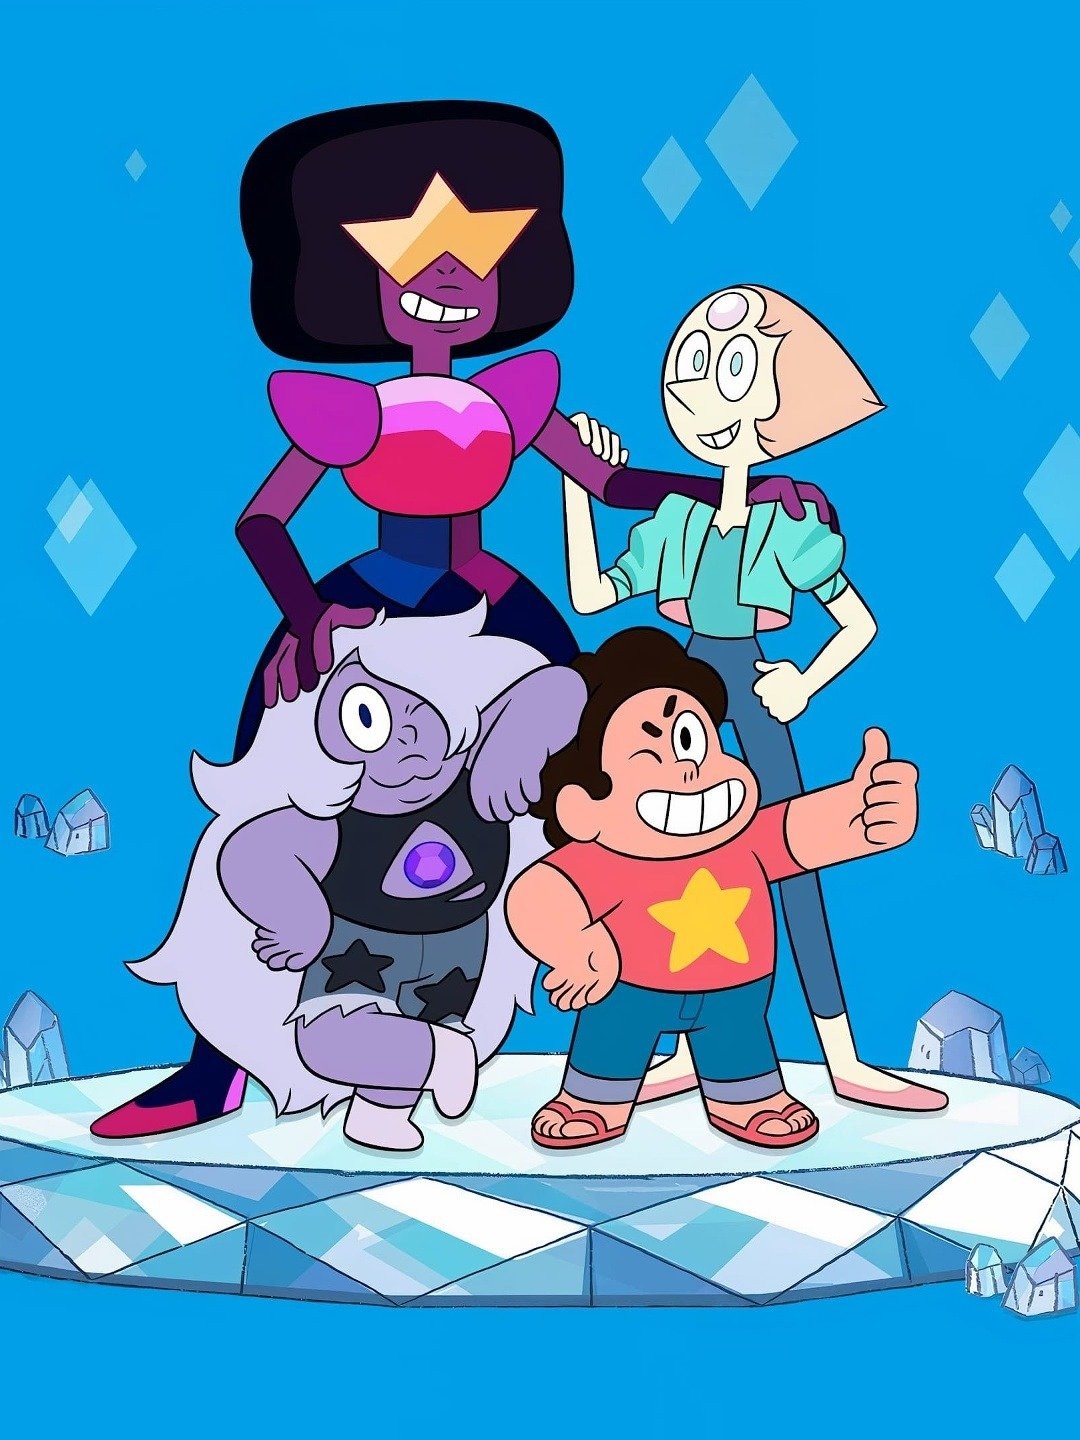 The Art of Steven Universe: The Movie